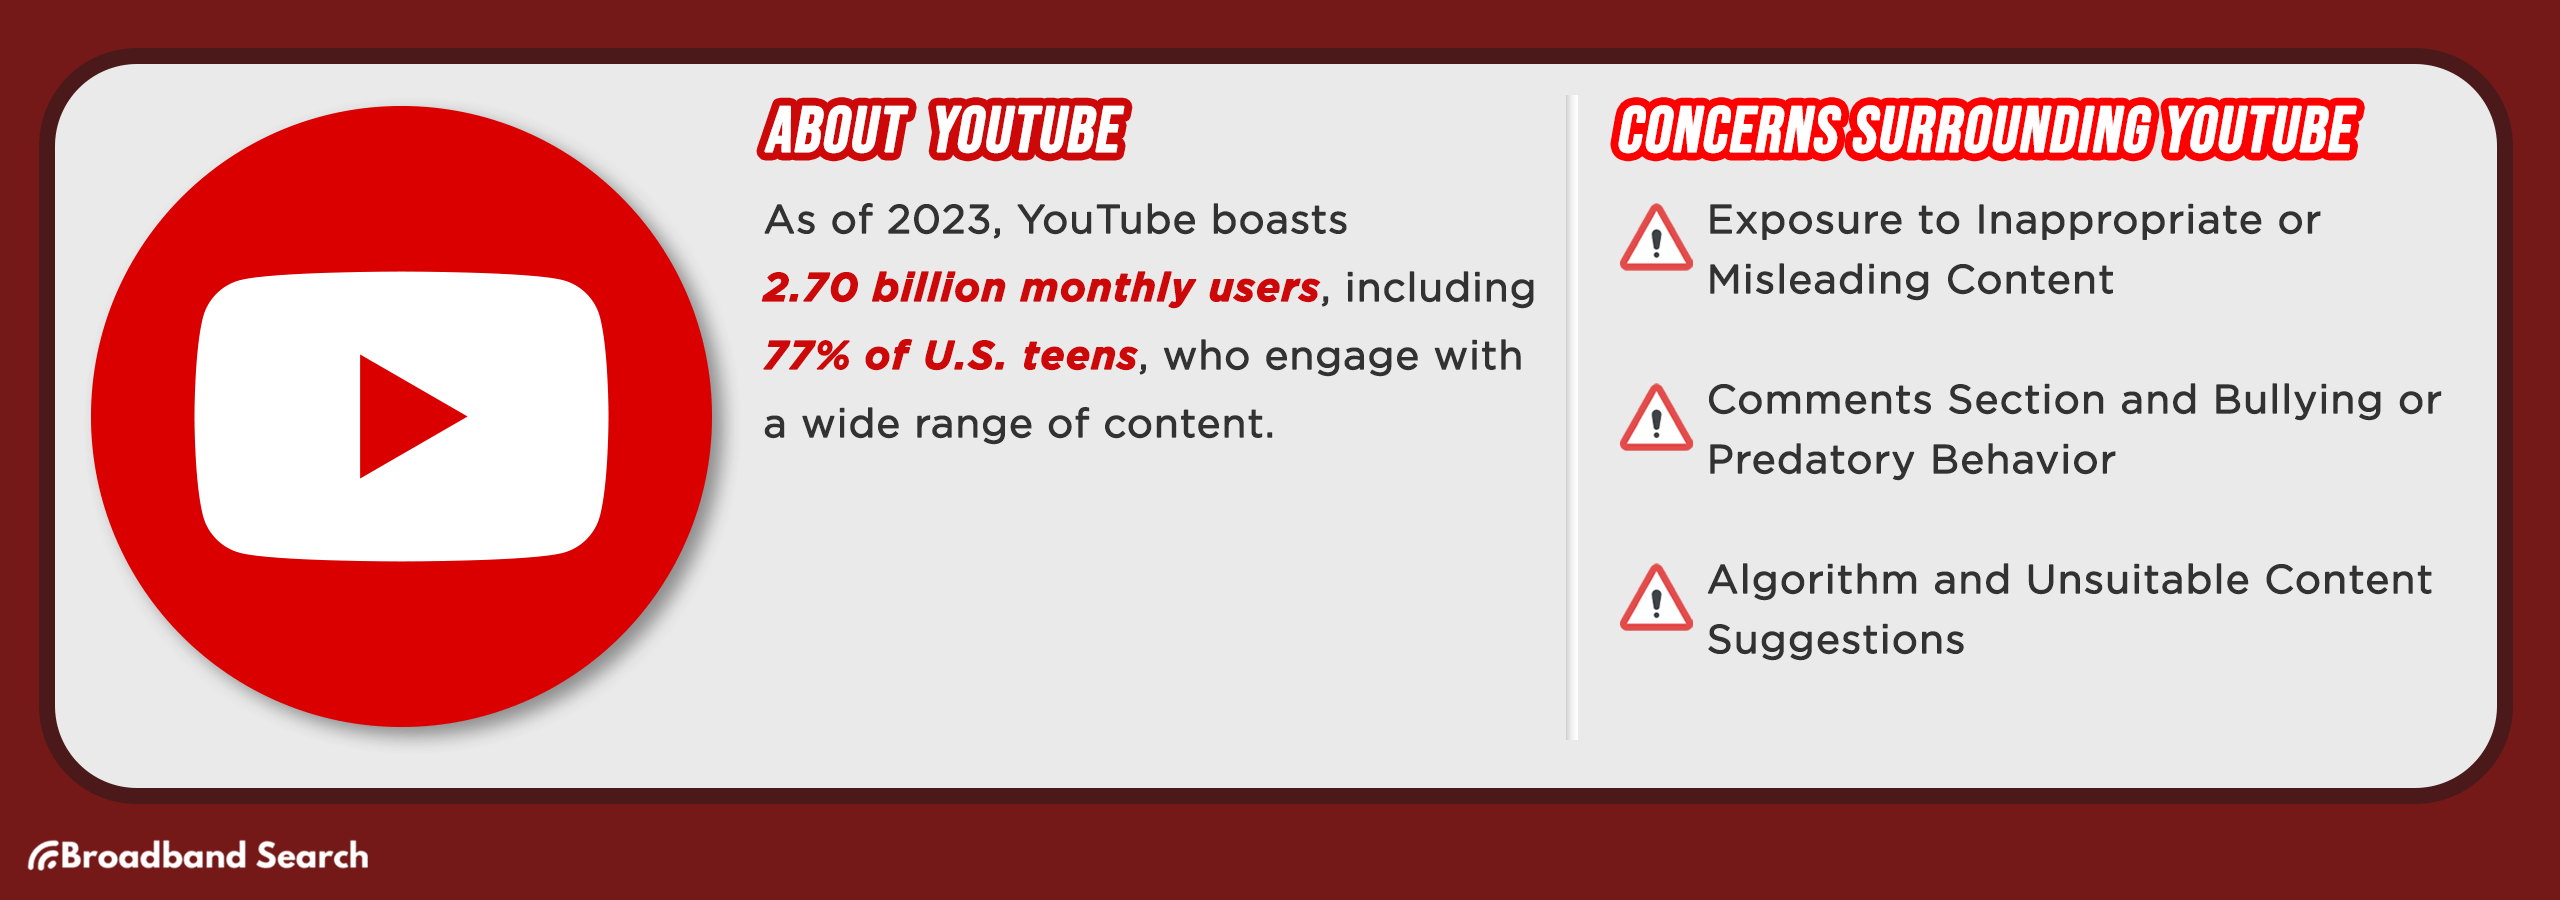 Statistics on Youtube and concerns surrounding usage of the social media app